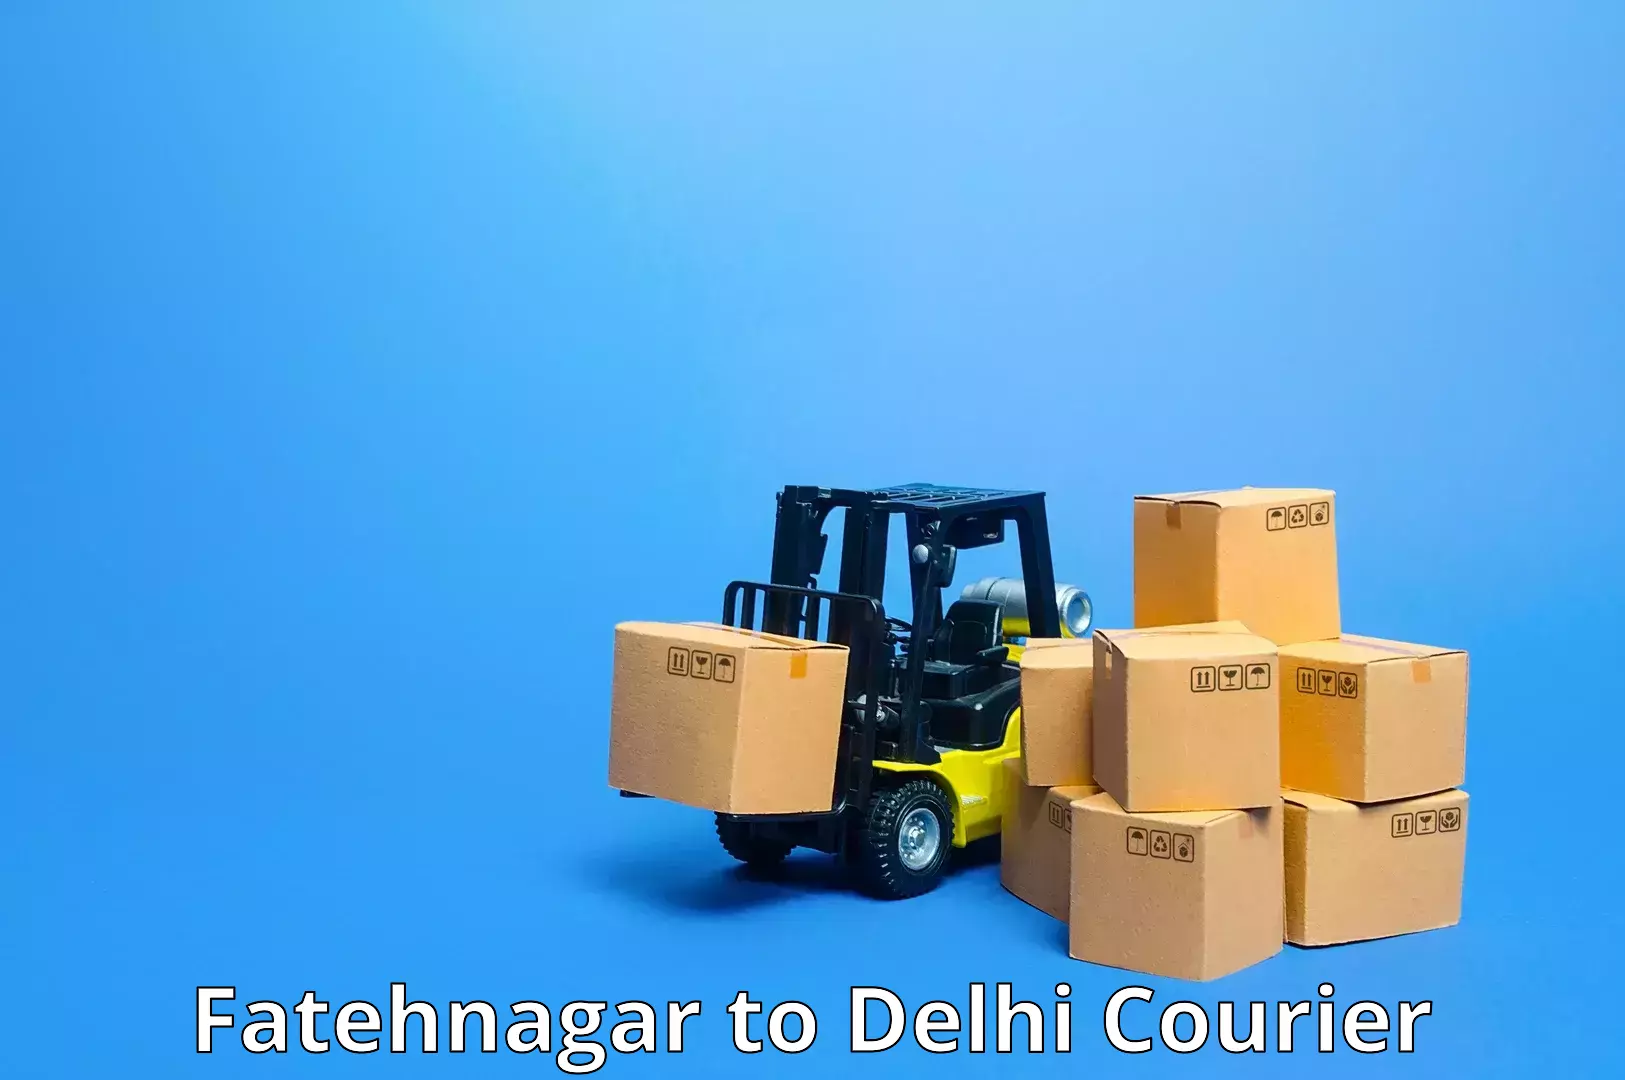 Small business couriers Fatehnagar to NCR